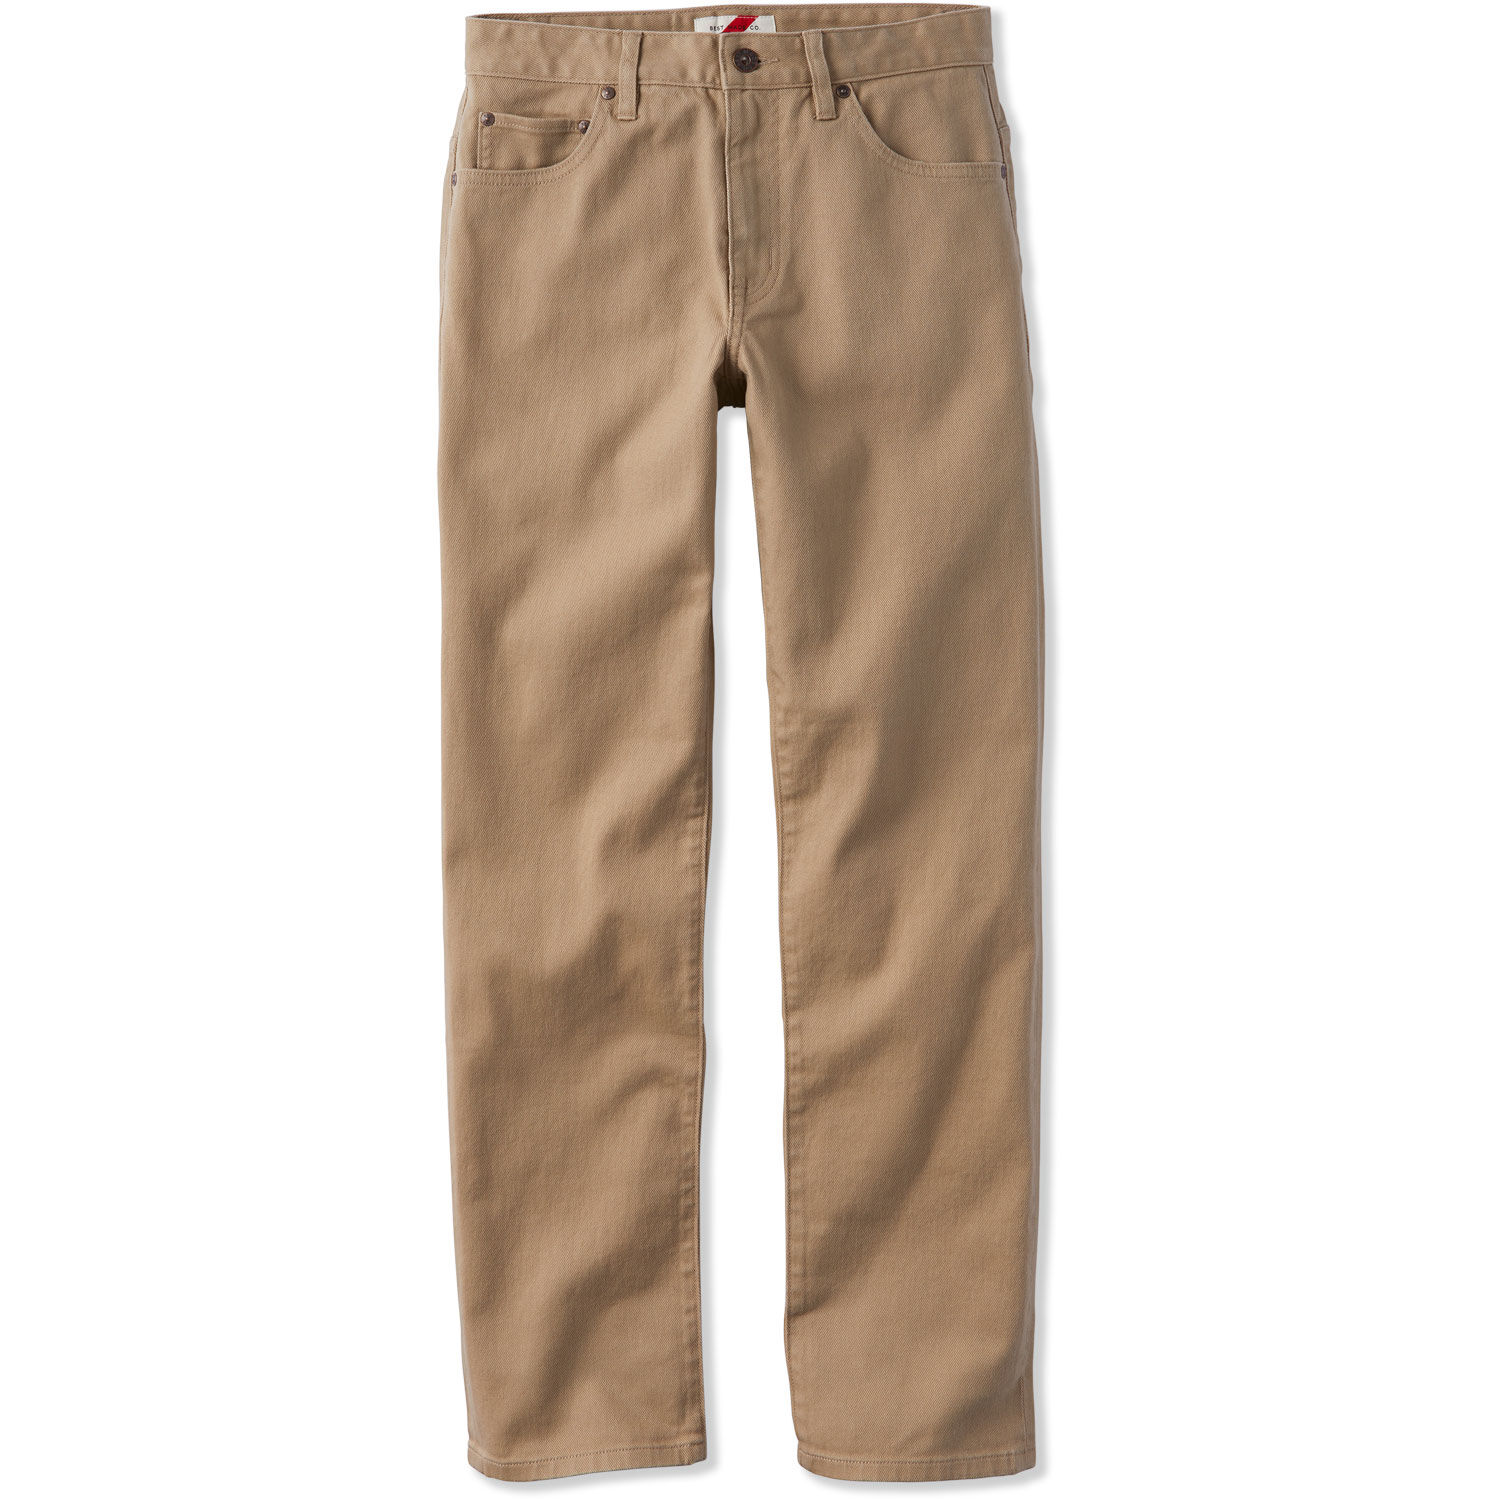 Jeans Pants Company Name Flash Sales, SAVE 30%, 43% OFF